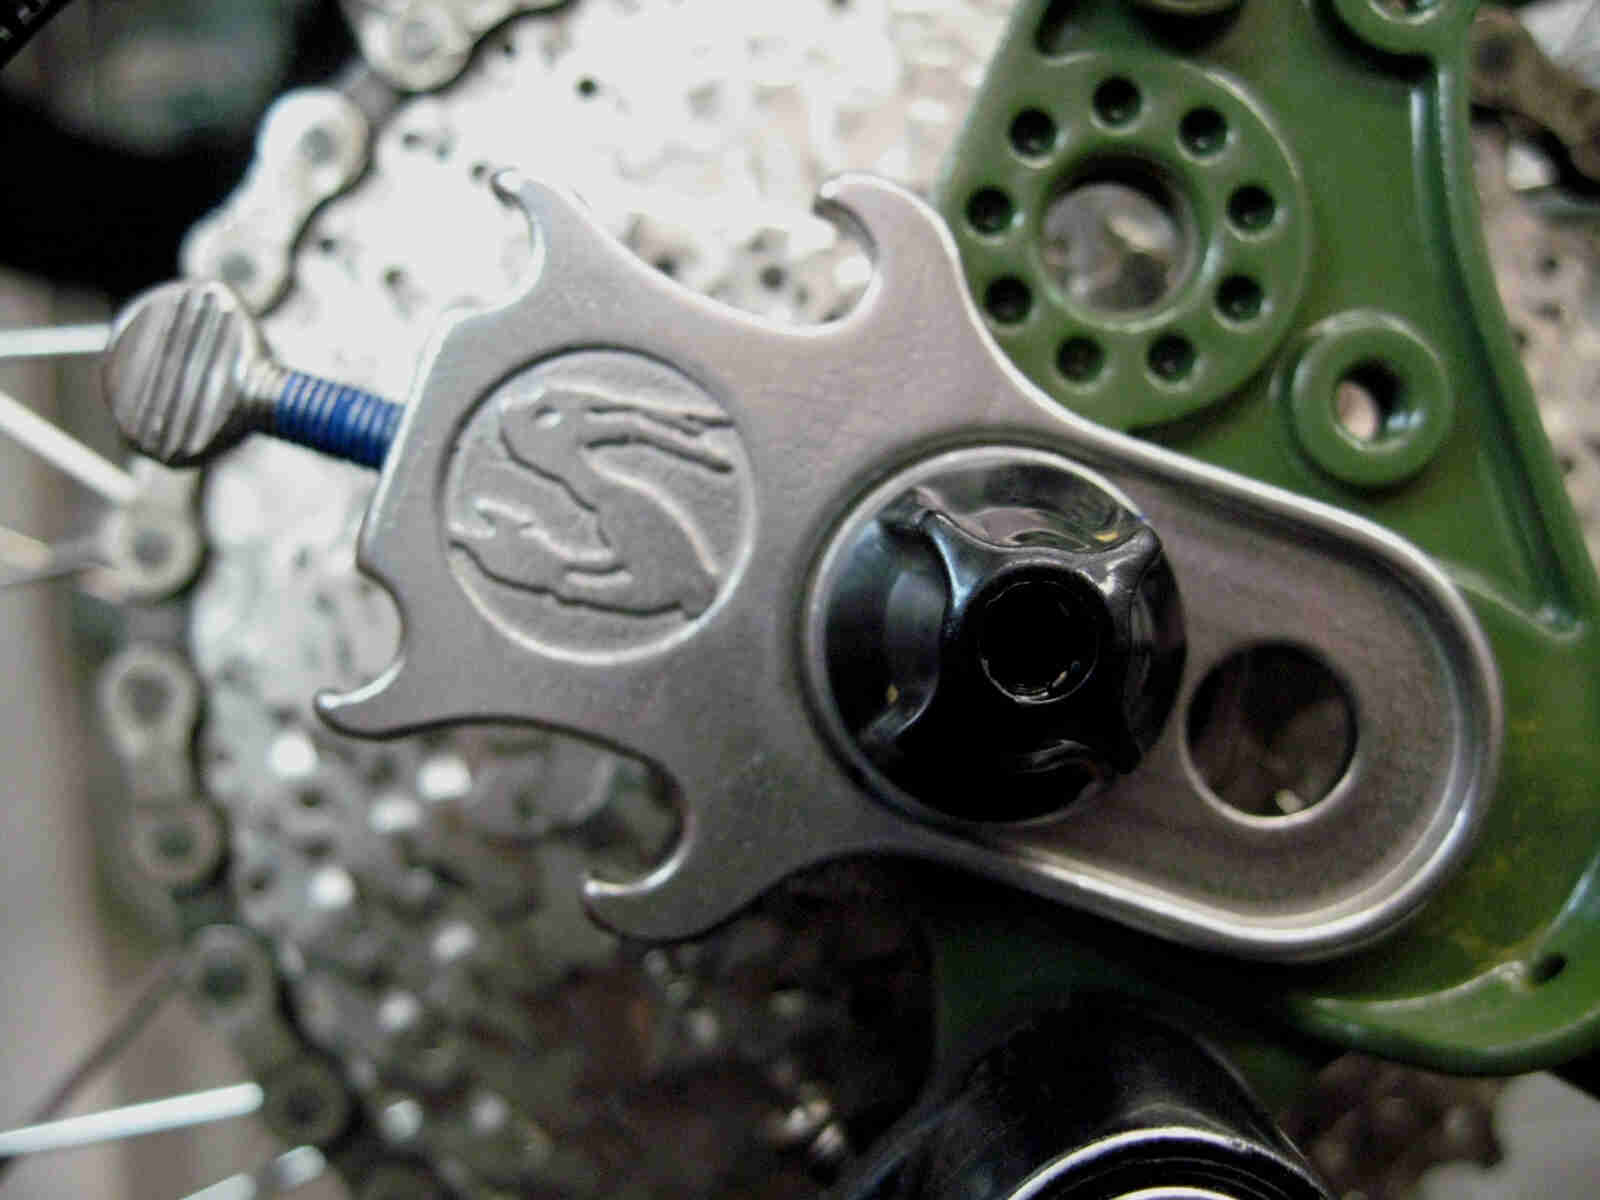 Surly Ogre bike - green - dropout with Tuggnut detail - right side close up view